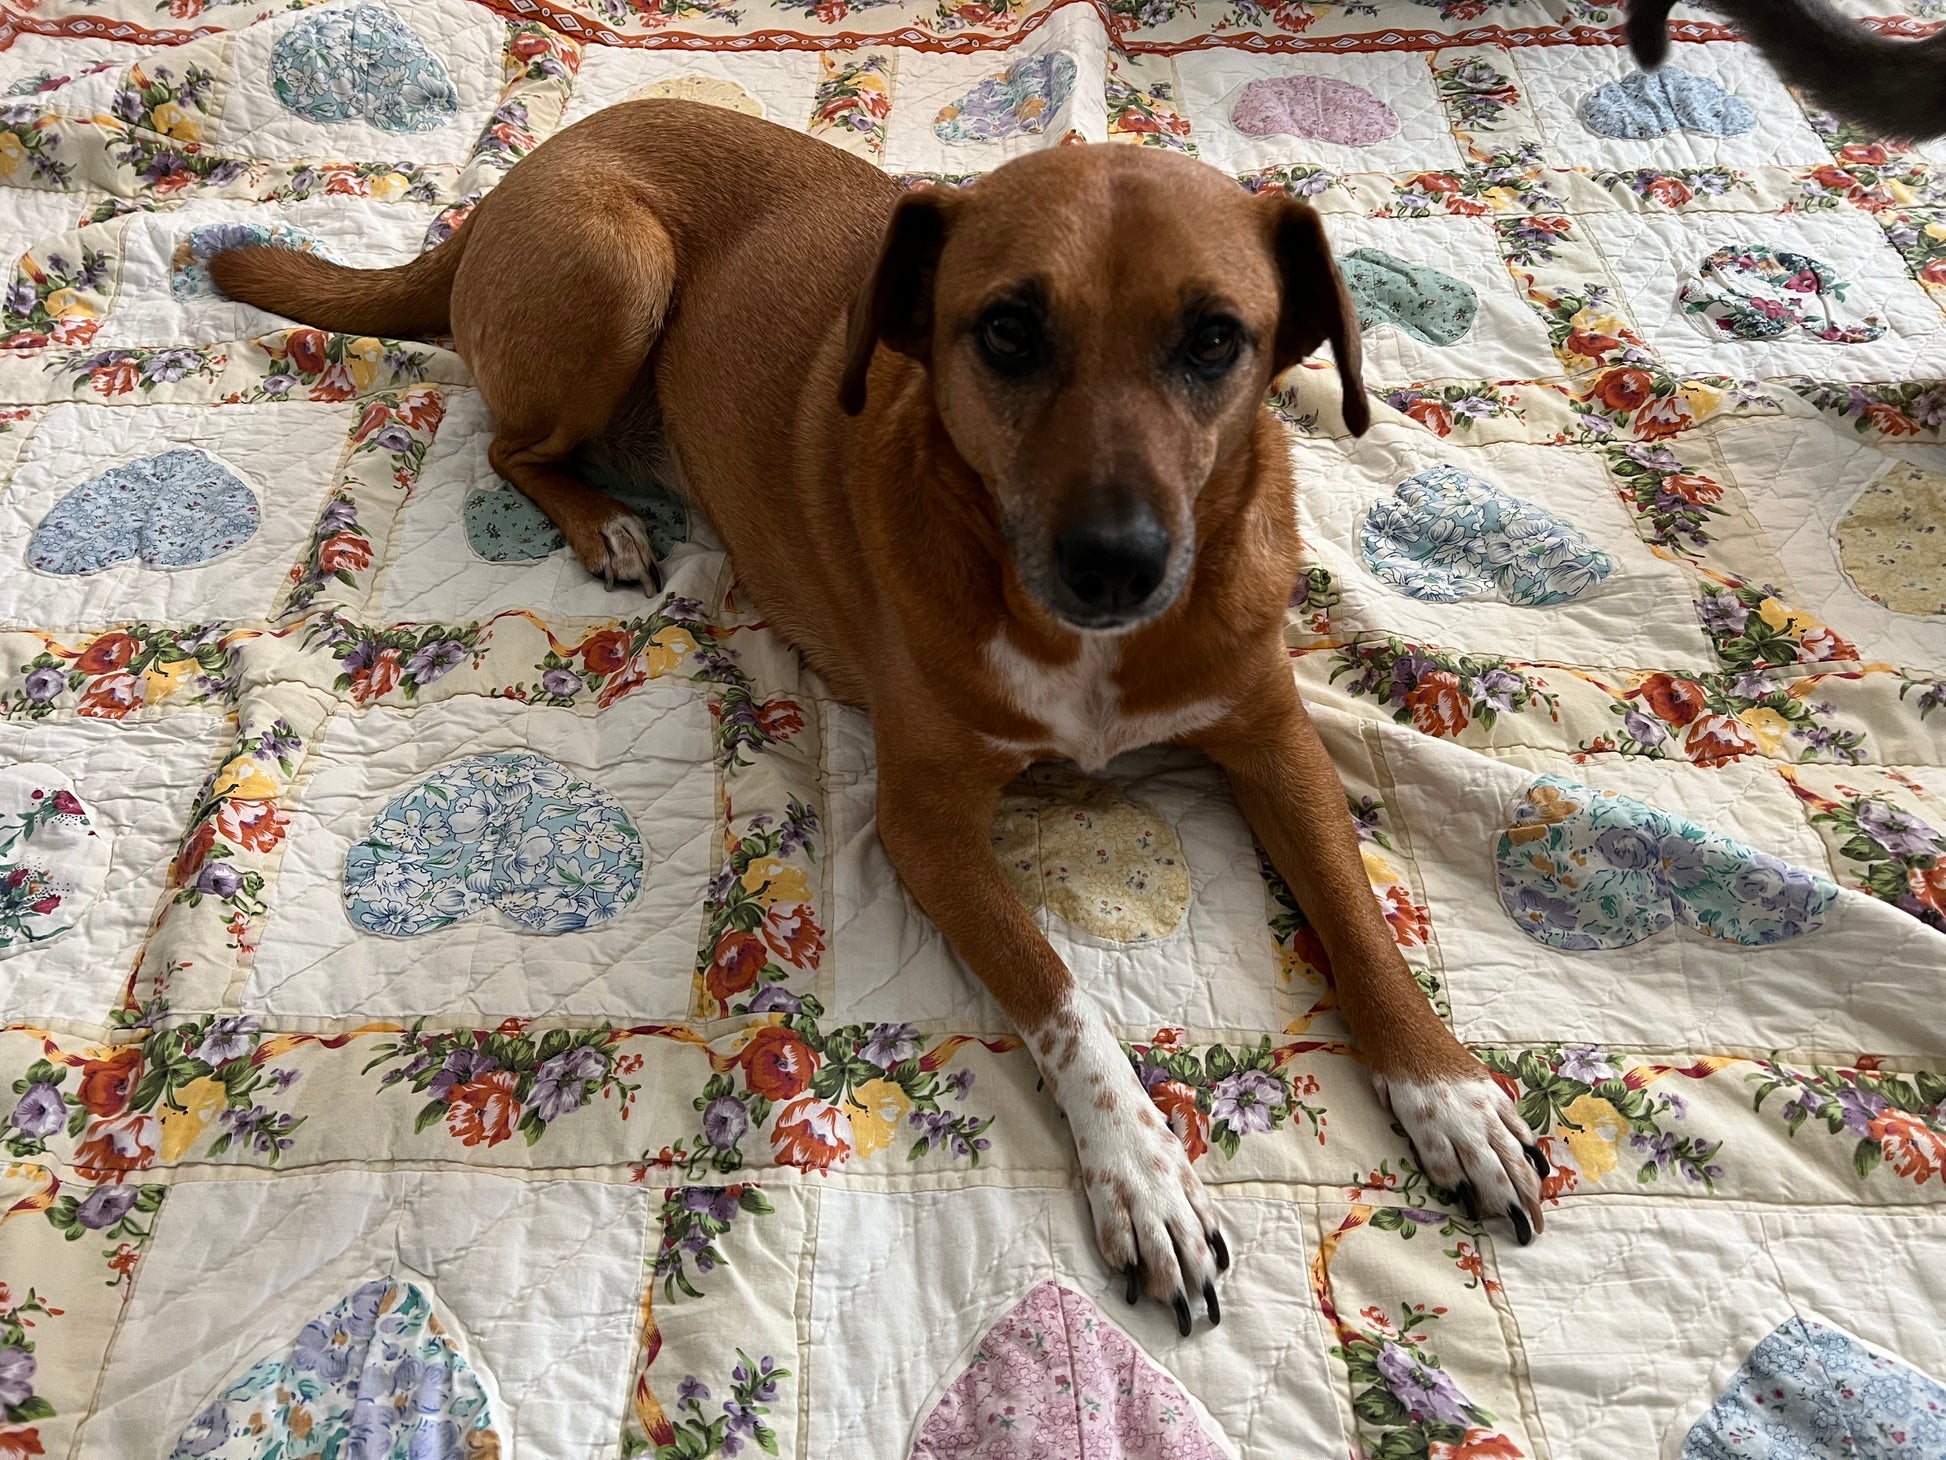 a dog lays on top of the quilt, she has polkadot socks, and is obviously enjoying the comfort of this vintage quilt